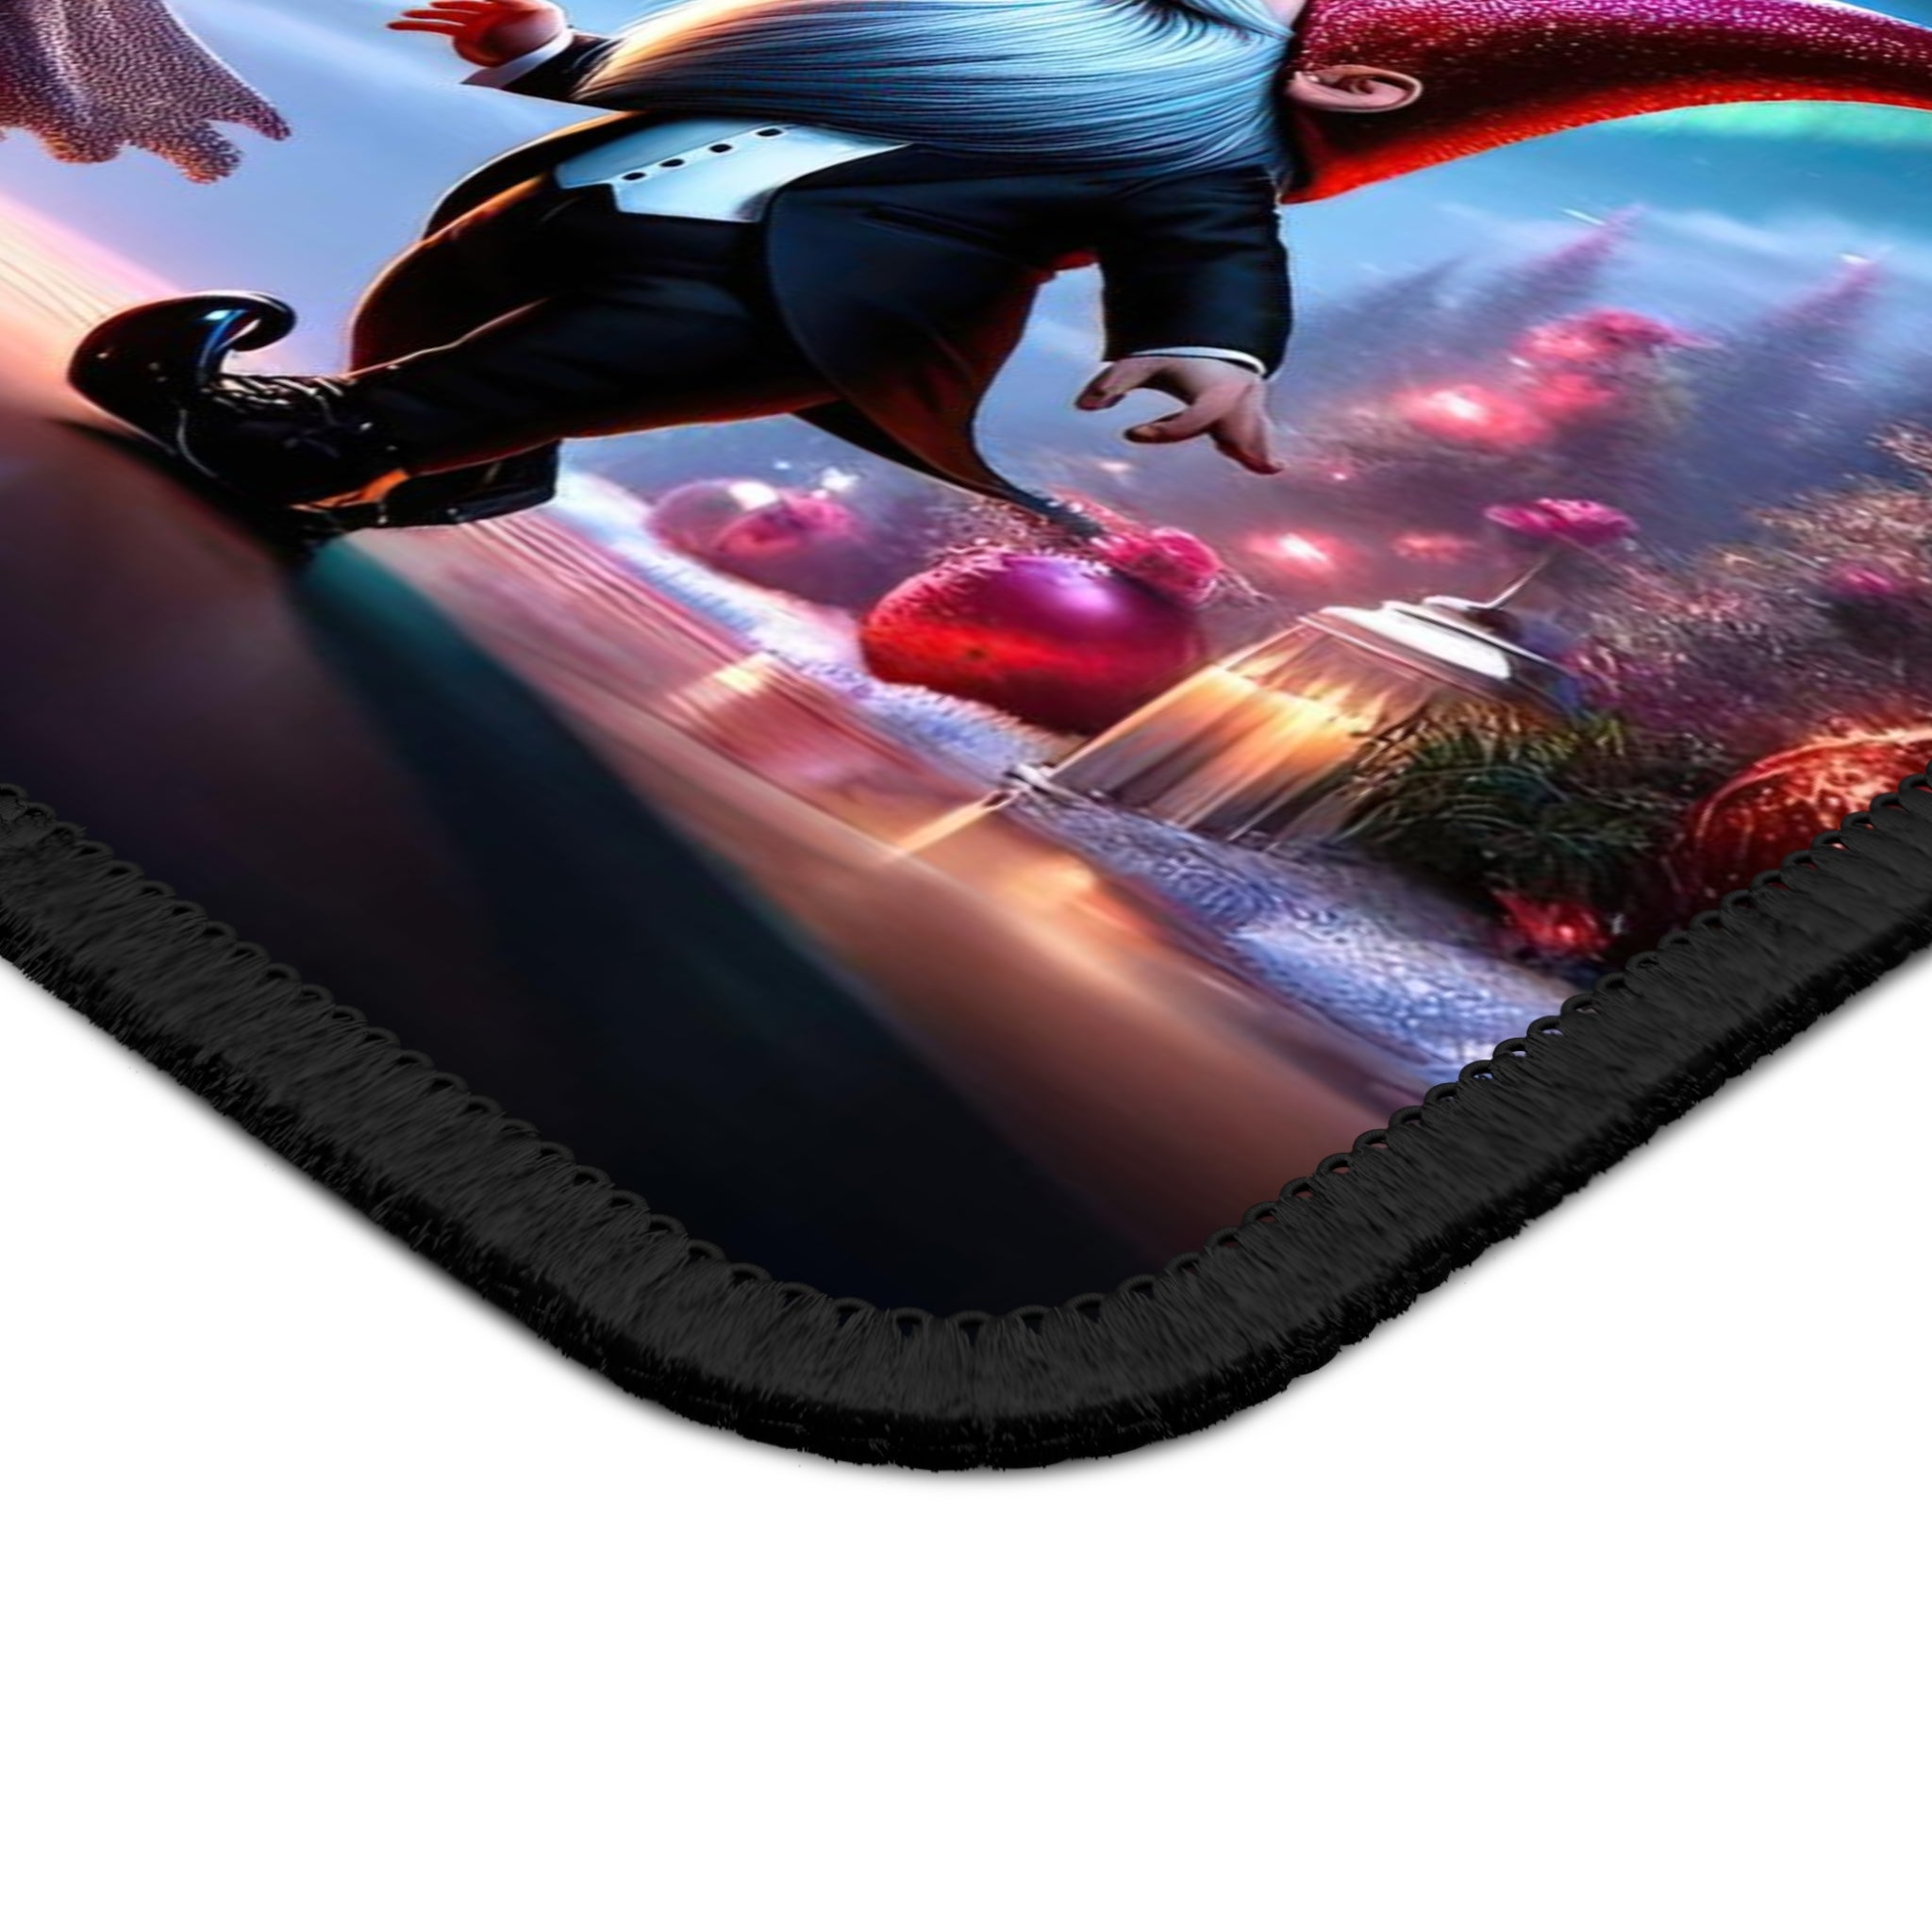 A New Year's Eve Gala Gaming Mouse Pad